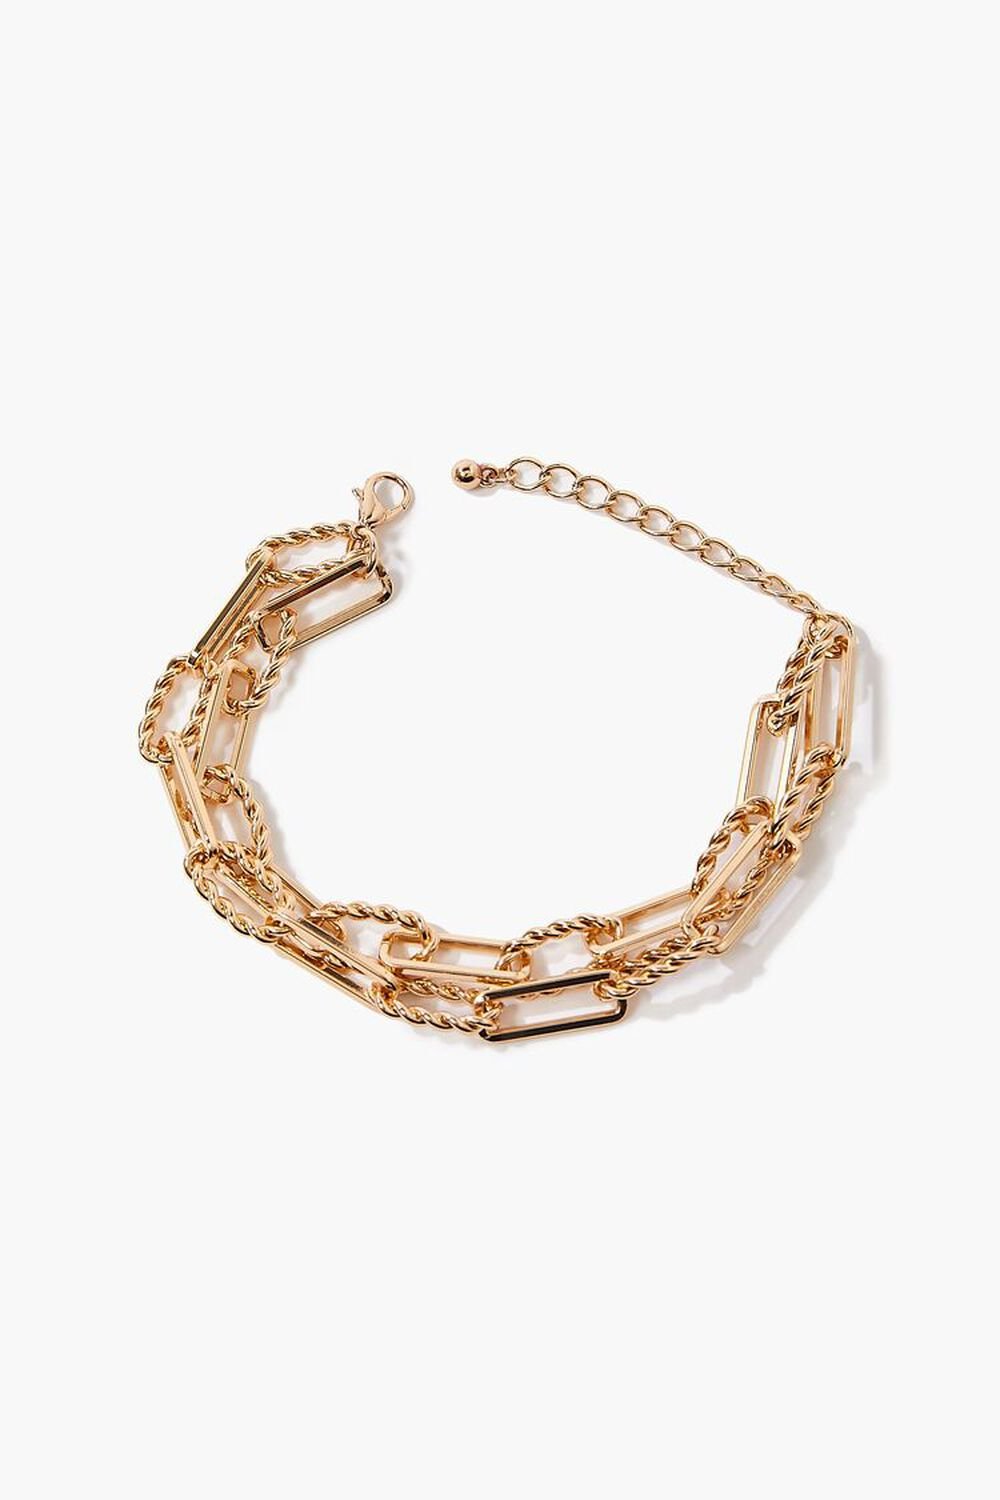 GOLD Twisted Chain Layered Bracelet, image 1